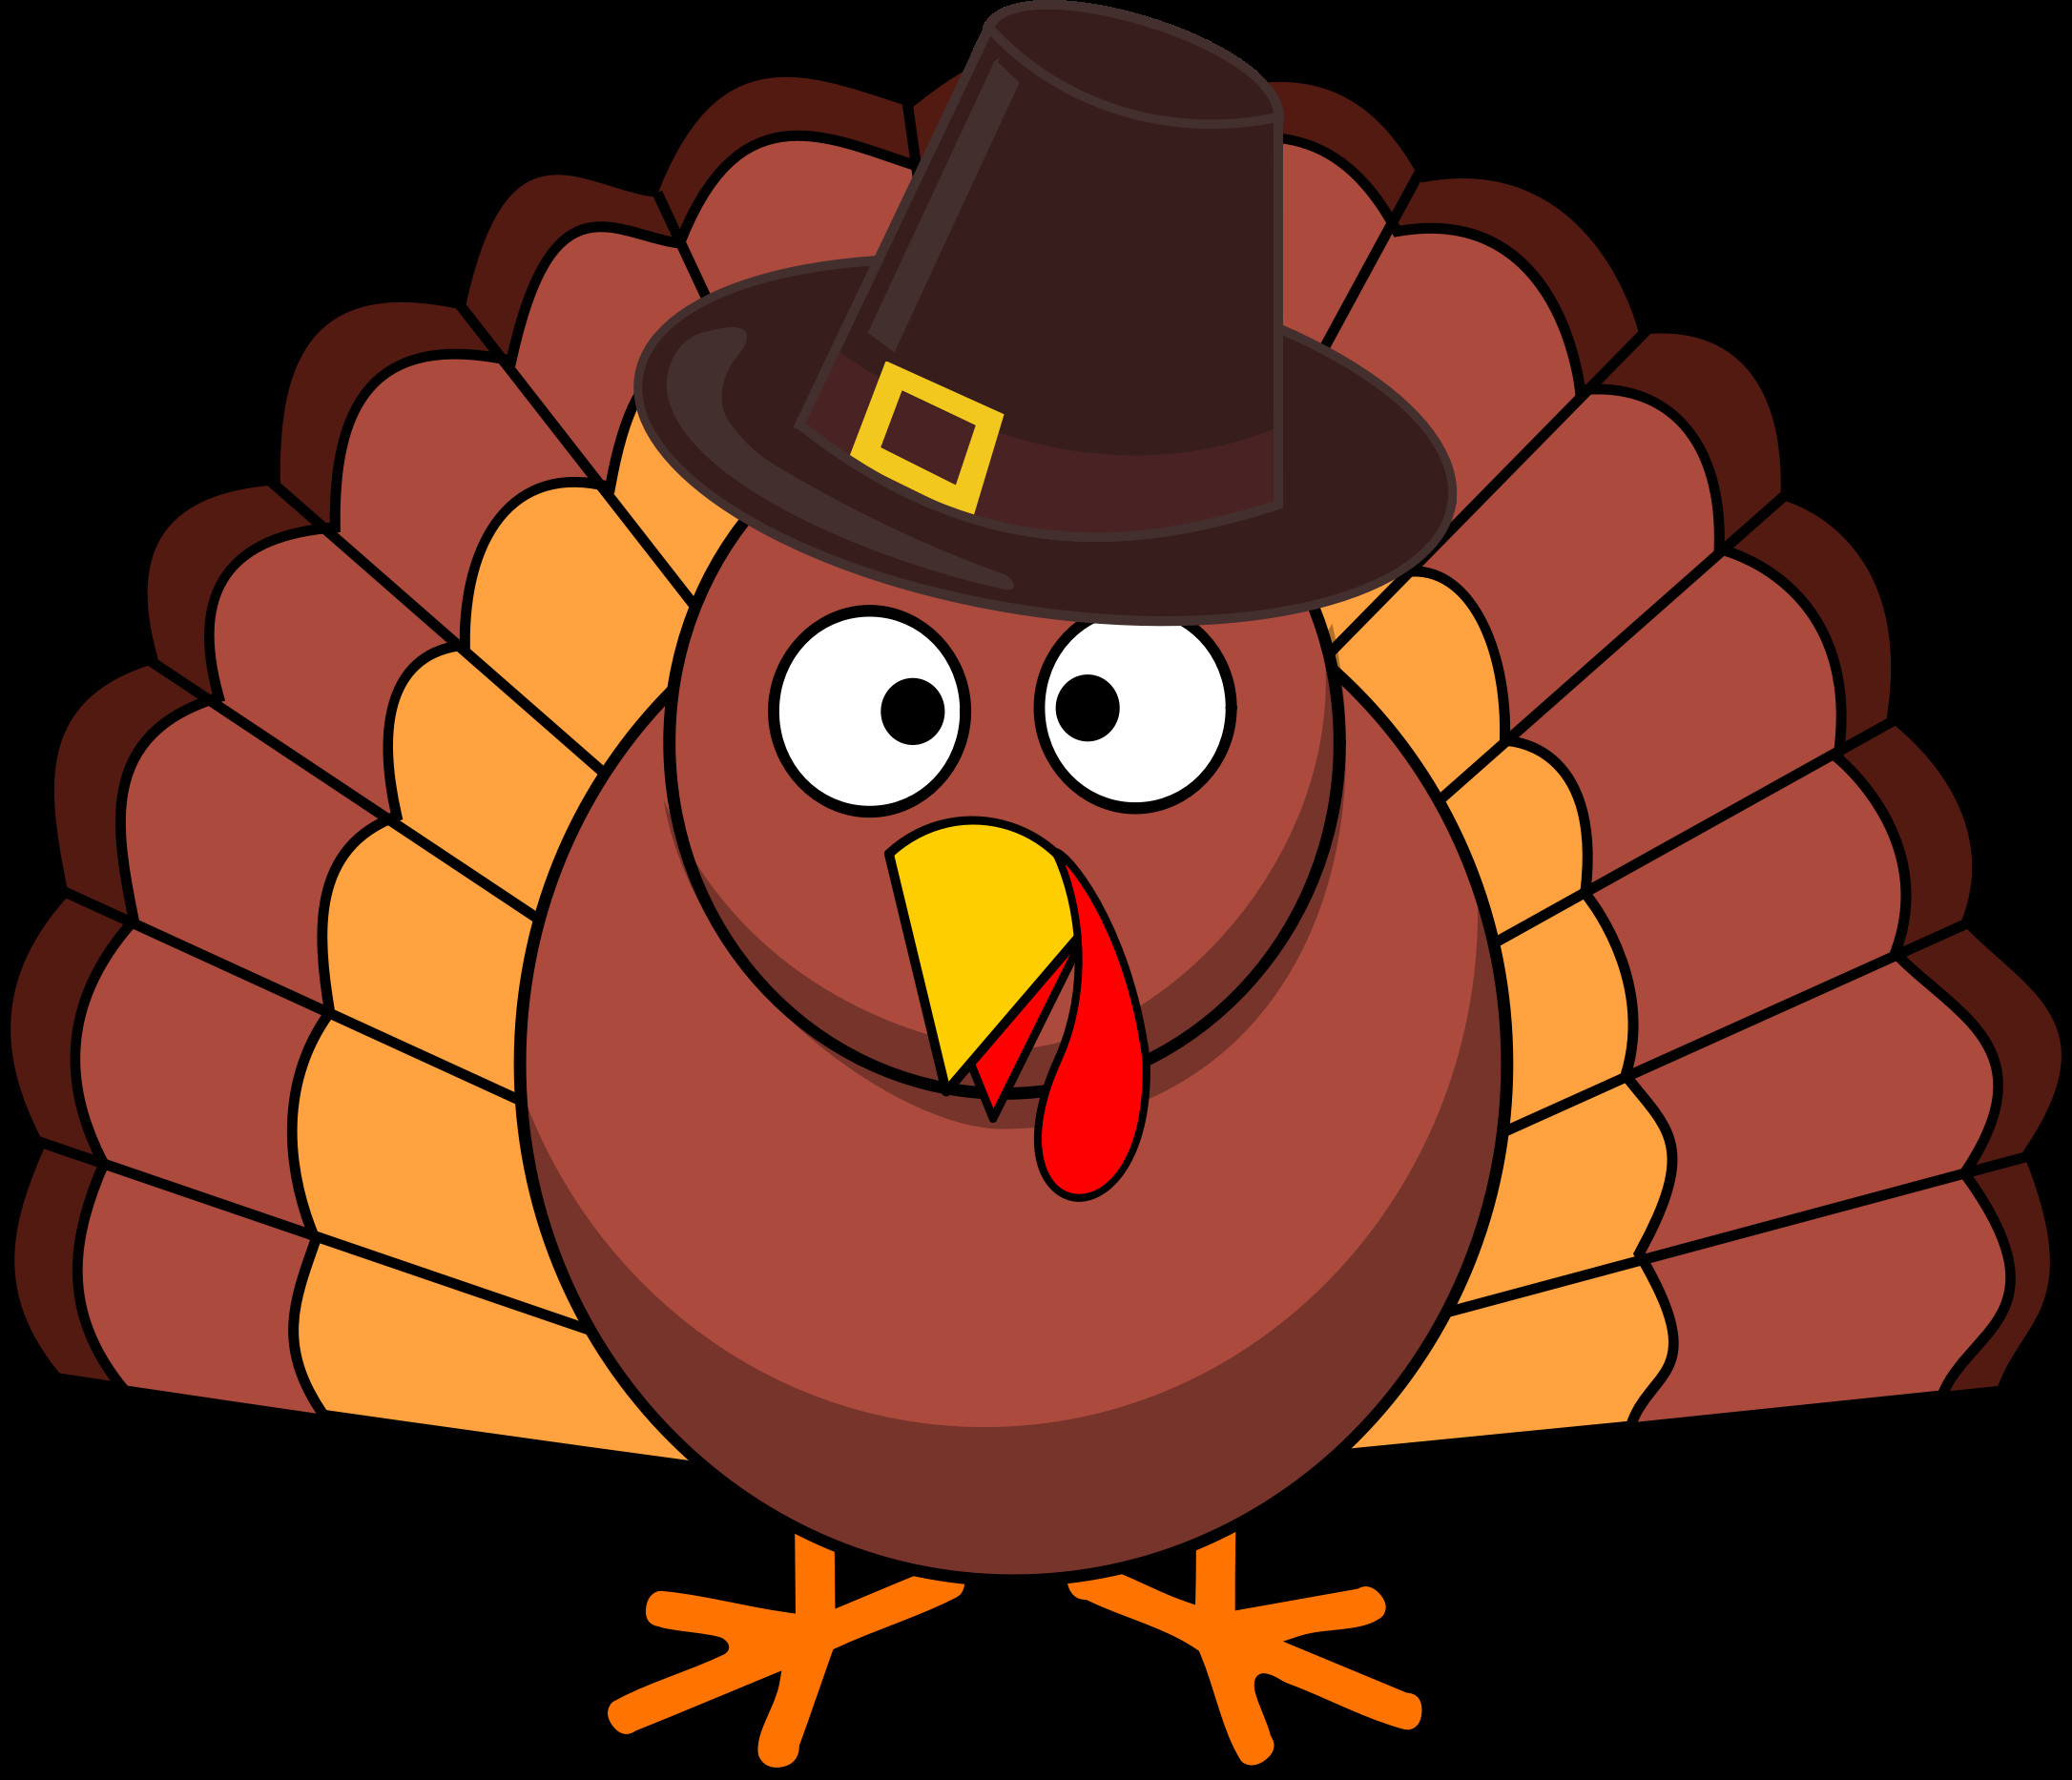 Thanksgiving Turkey Vector
 Try timing your turkey the Spotify way Pick a playlist